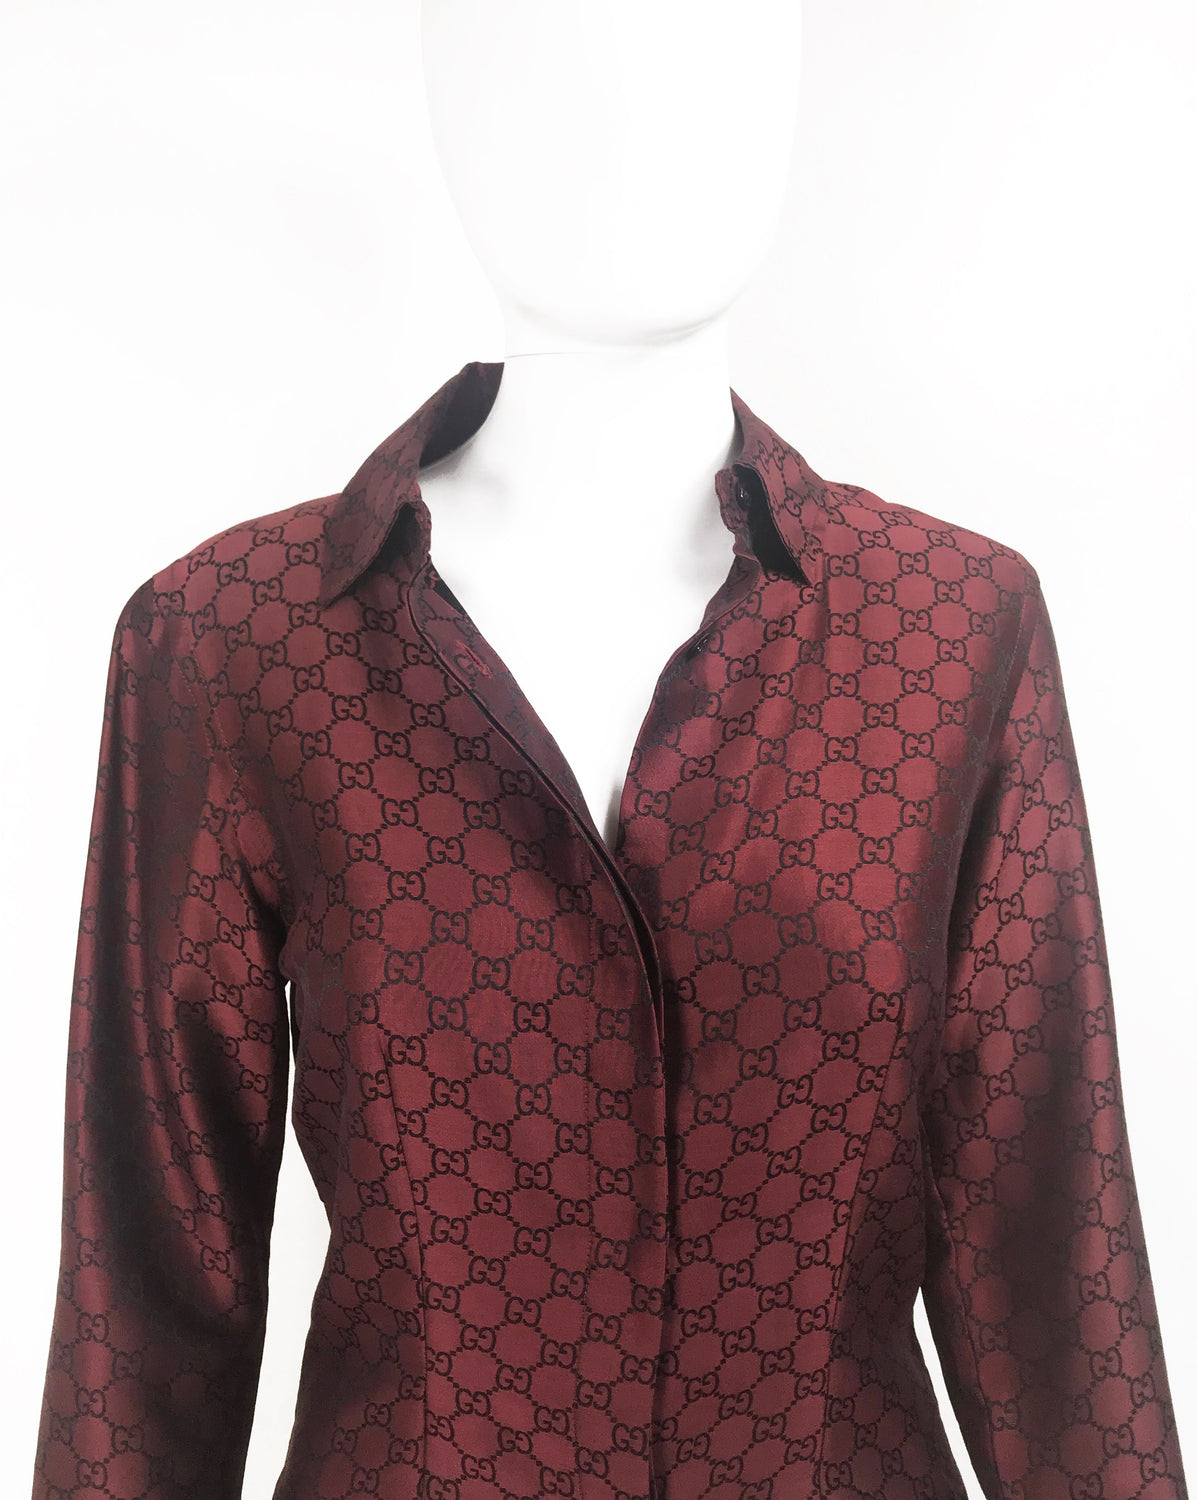 FRUIT vintage Gucci silk shirt designed by Tom Ford dating to the late 1990s. It features a classic Gucci monogram logo print all over in red/black contrast print and a tailored fitted shape.